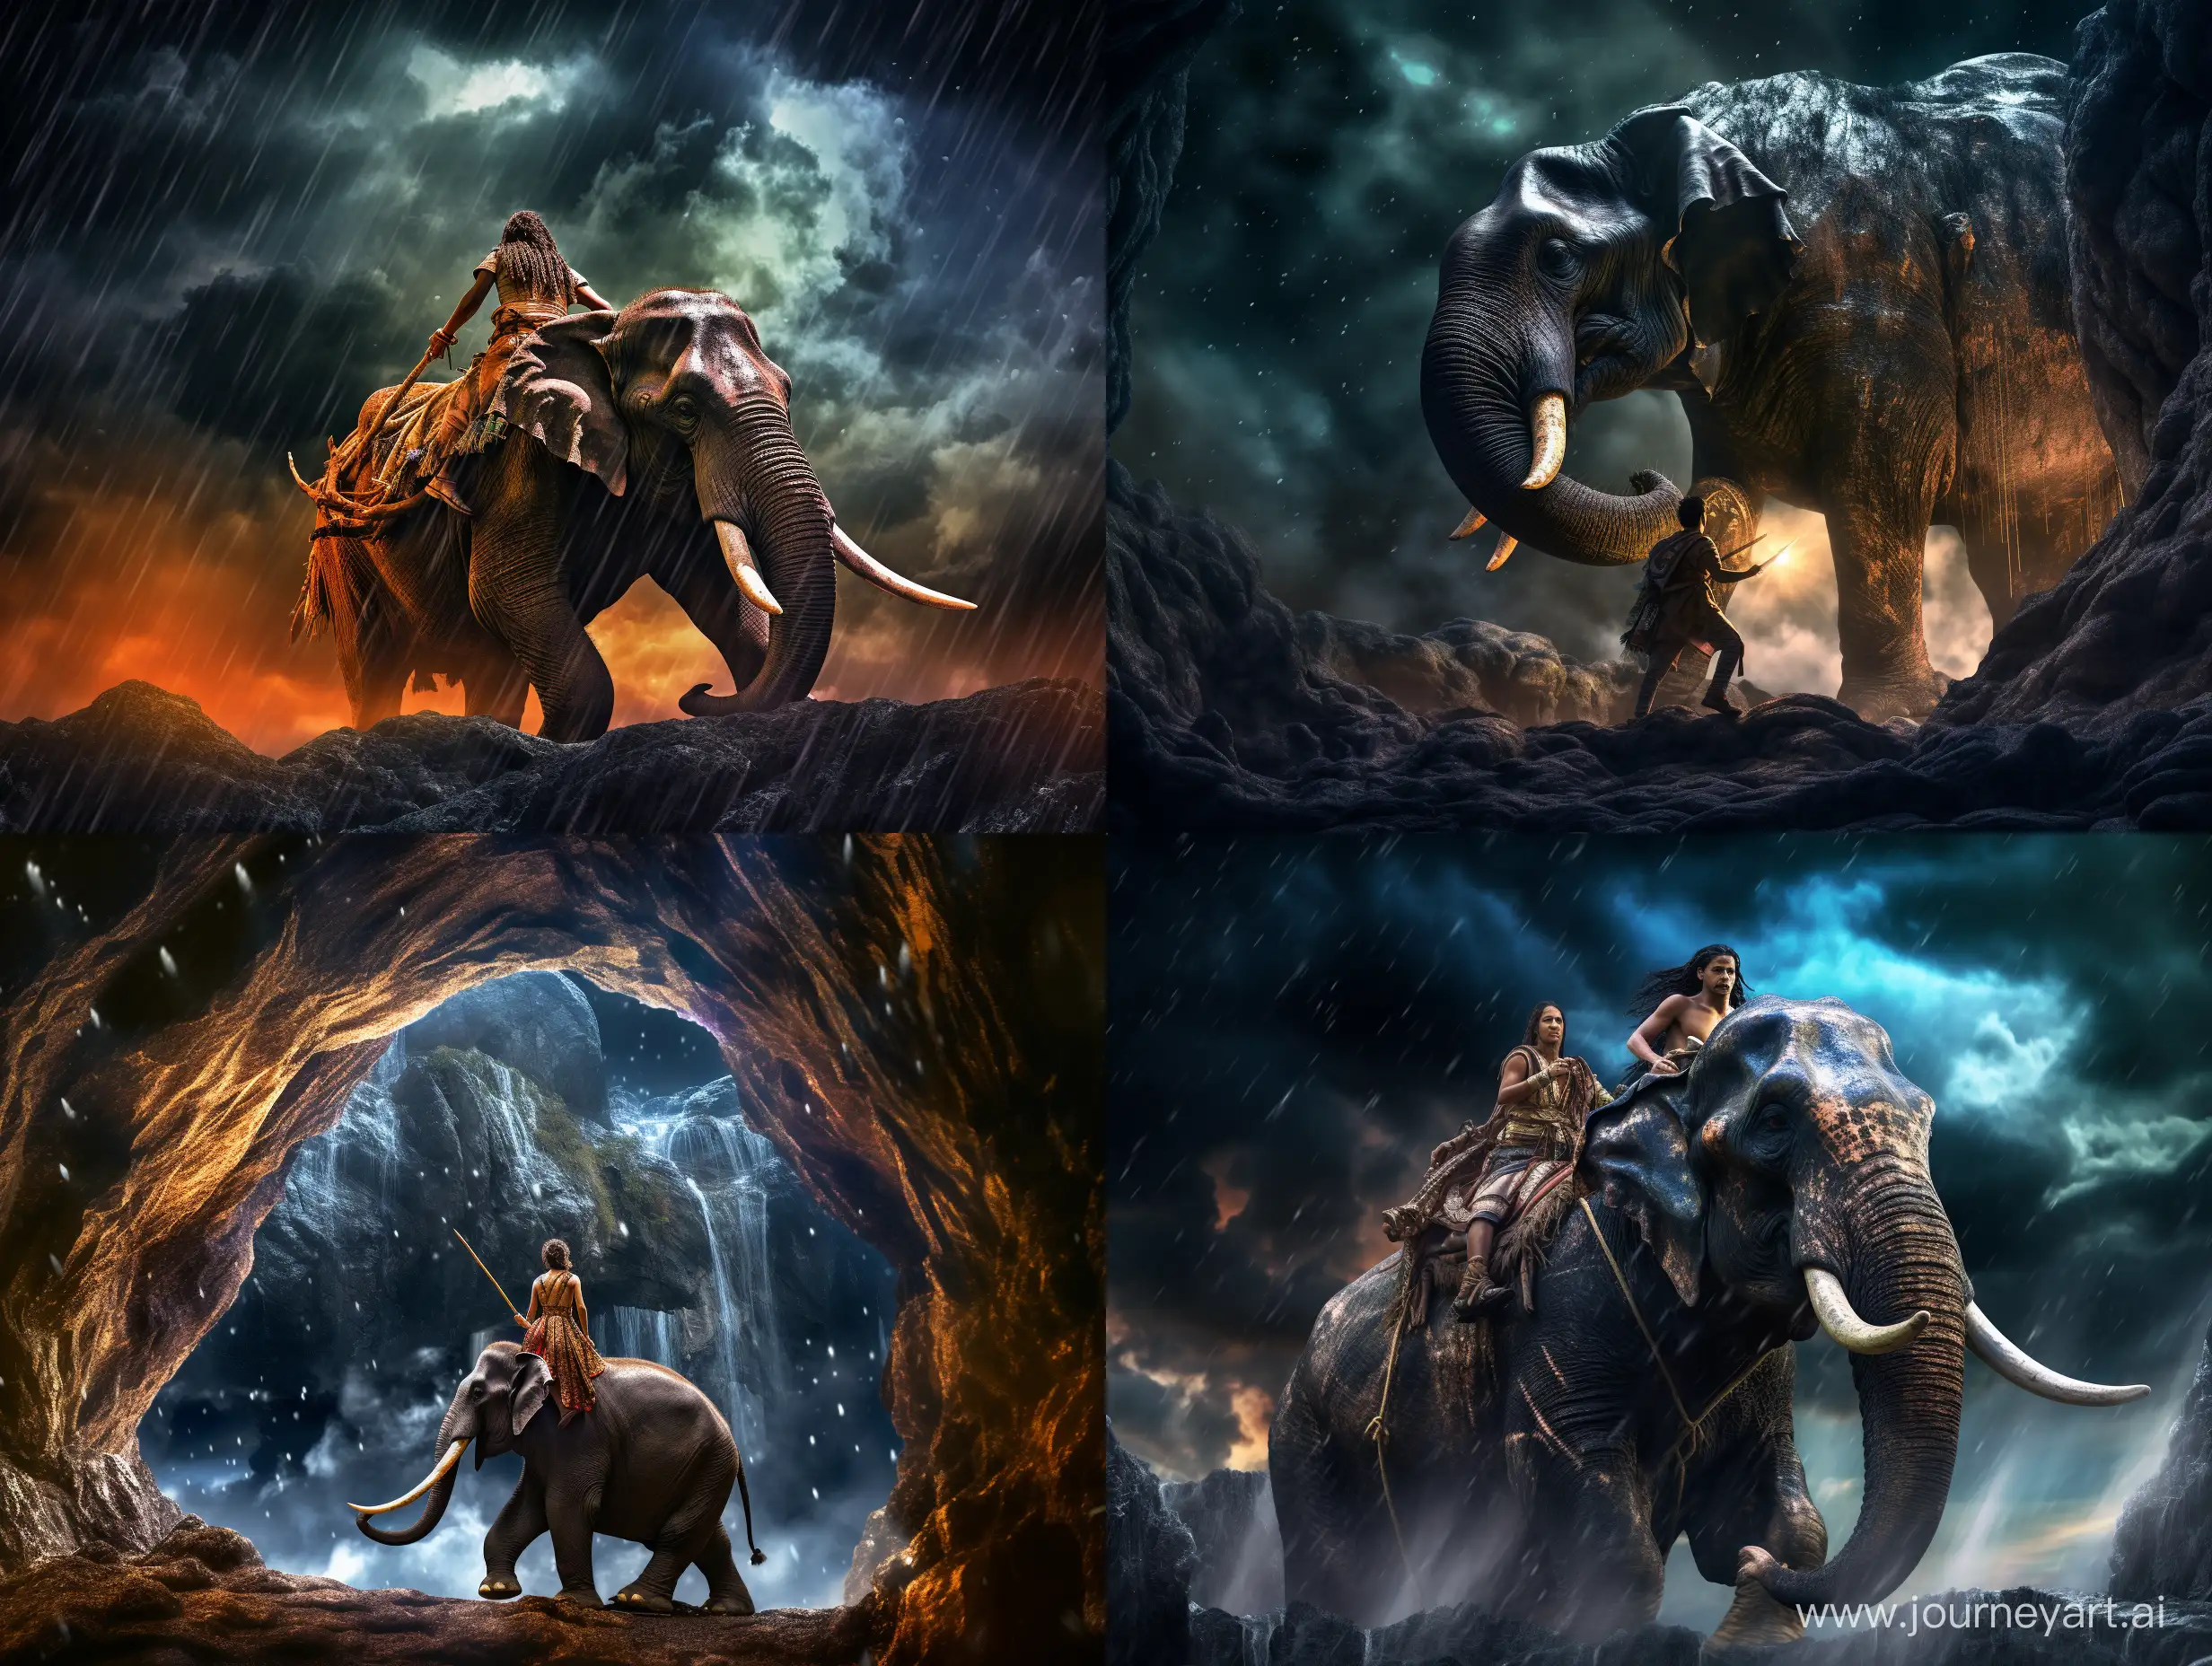 Persian-Knight-Riding-Frantic-Giant-Mammoth-Through-Stormy-Night-Cave